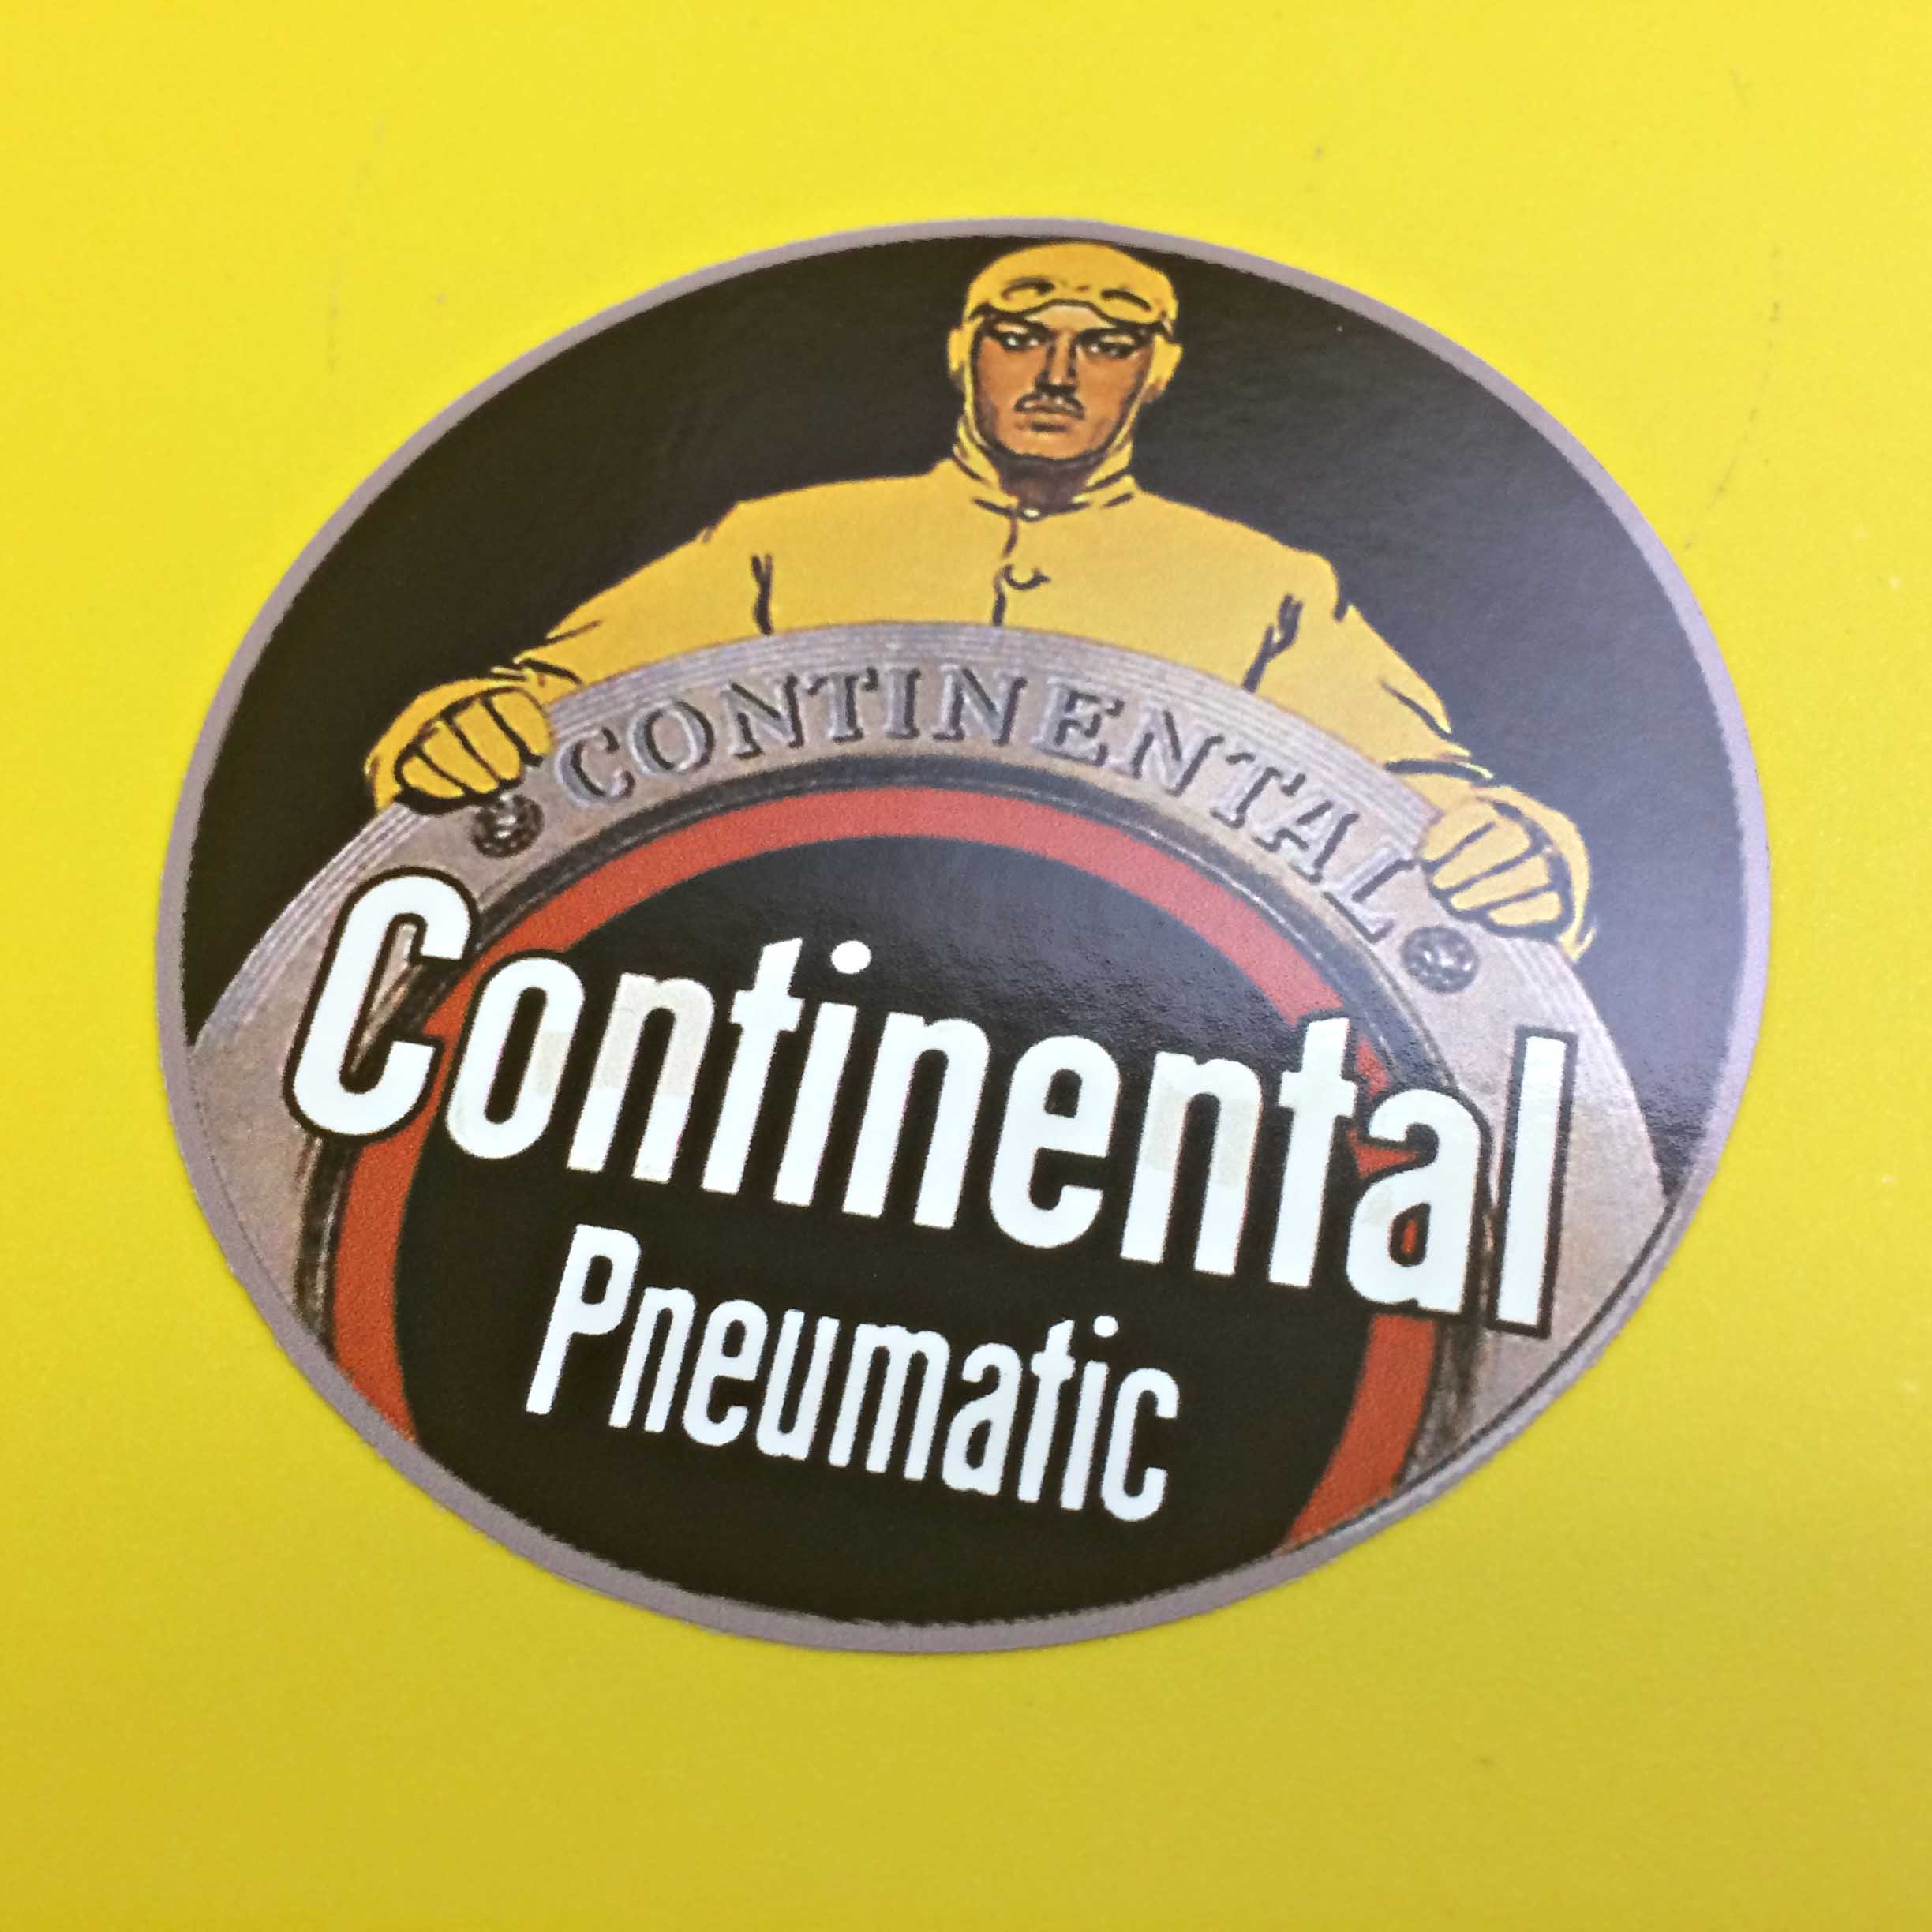 CONTINENTAL PNEUMATIC STICKER. Continental Pneumatic in white lettering on a black circular sticker. A man wearing a yellow vintage car racing suit with goggles and ear muffs is standing behind and resting both hands on a Continental tyre.